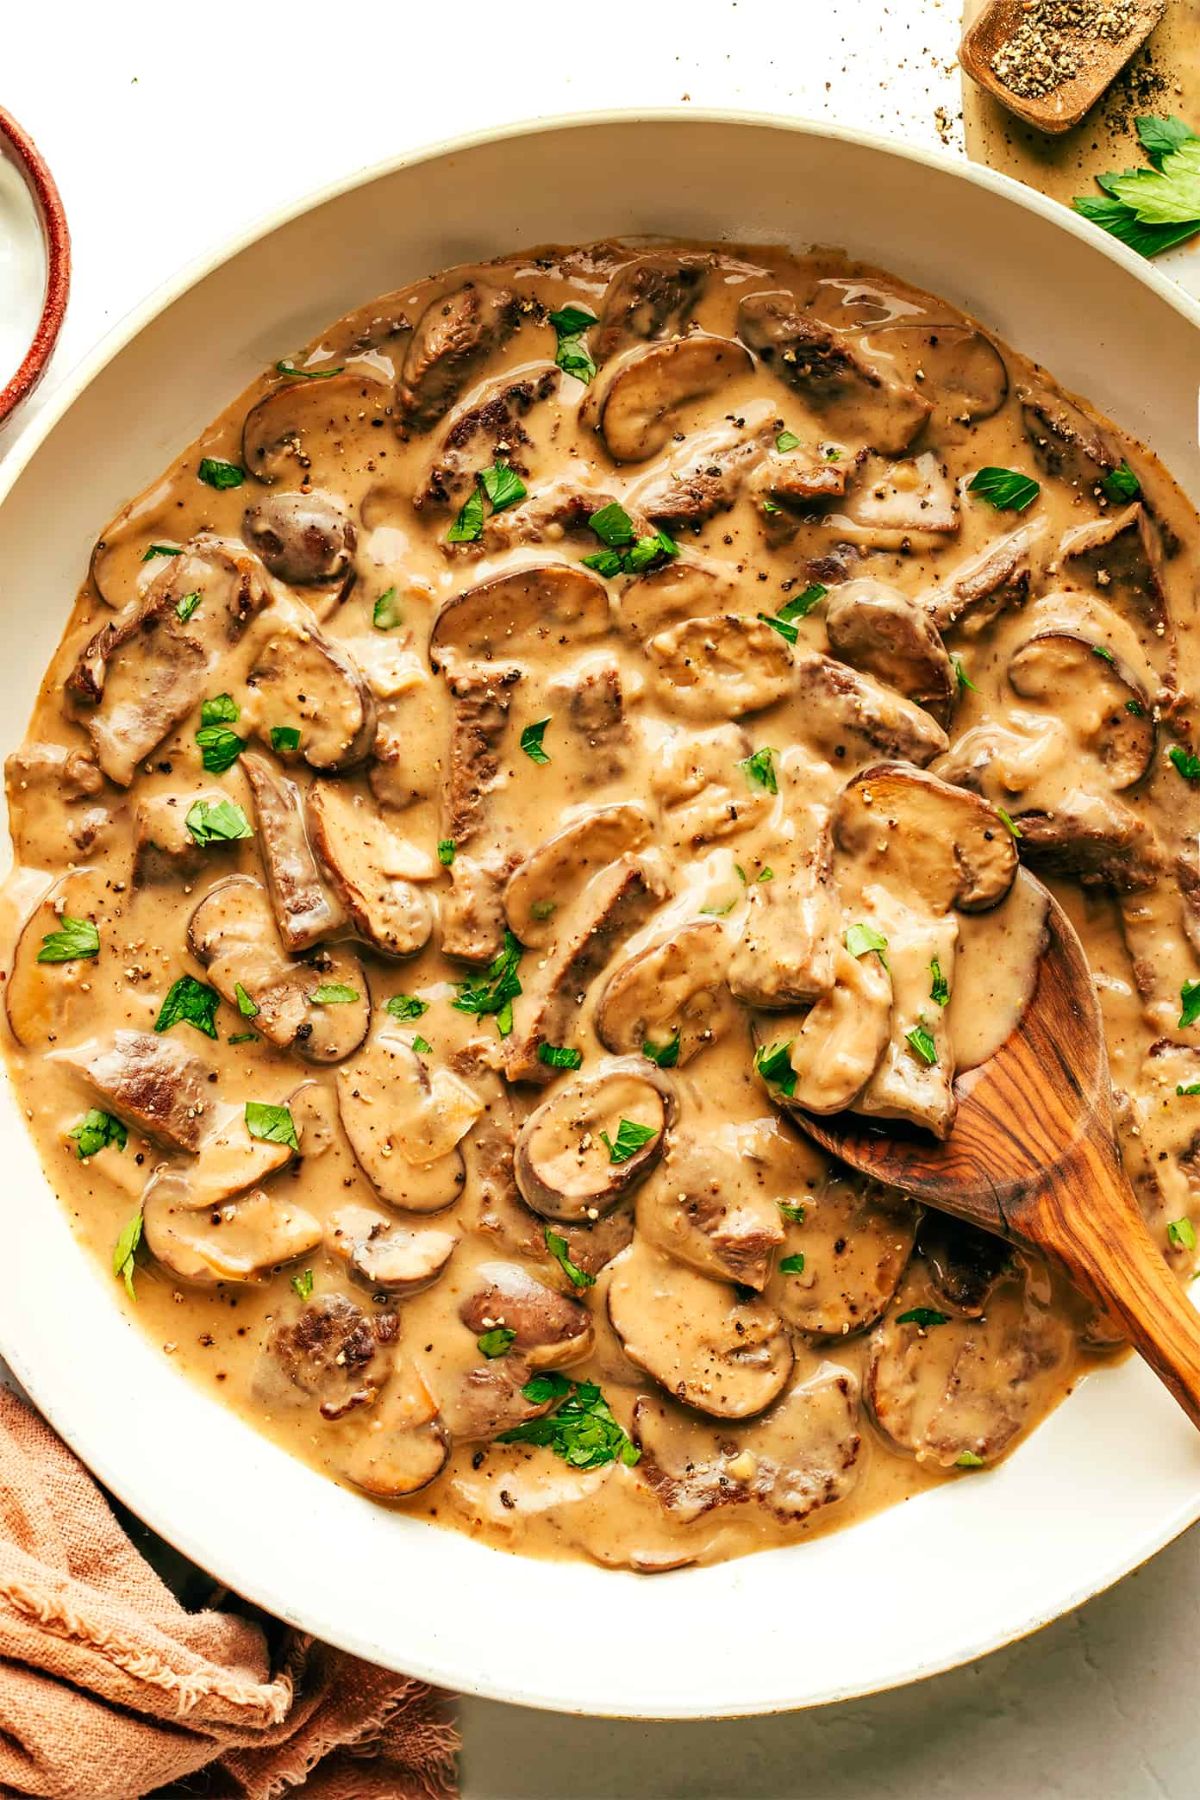 Juicy beef stroganoff in a white bowl with a wooden spoon.